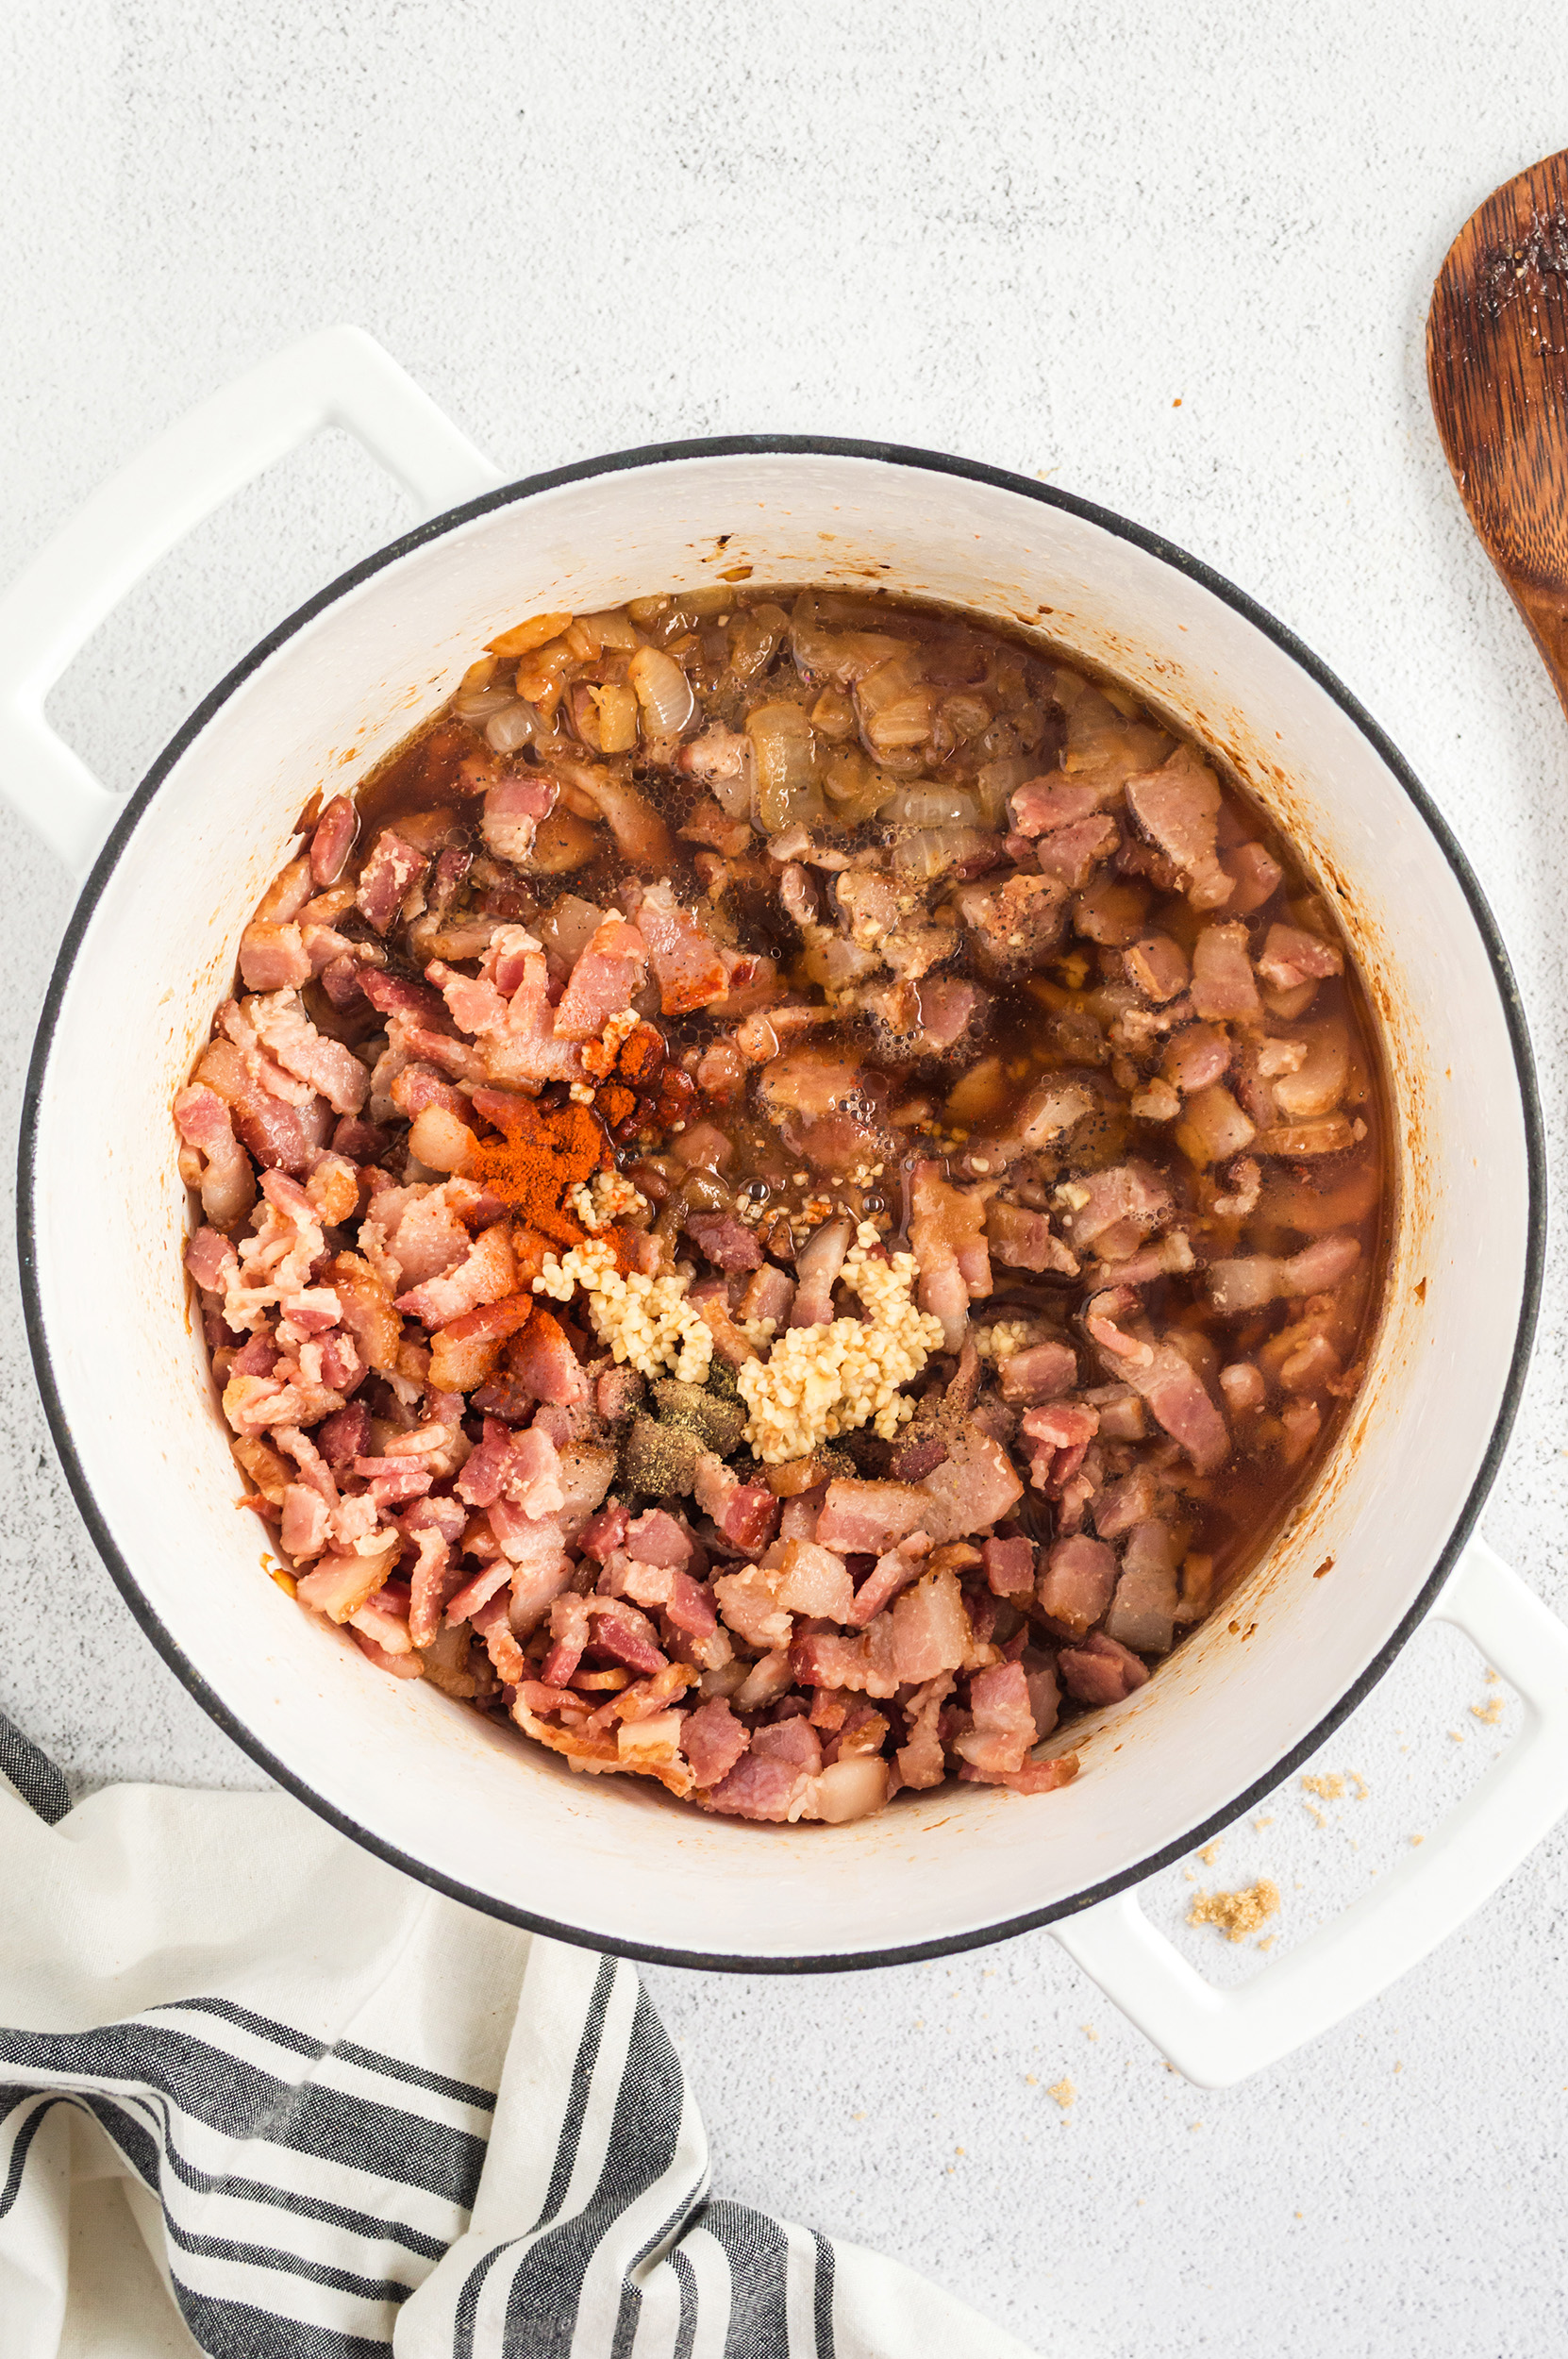 caramelized onions and bacon with the remaining ingredients in a large pot, ready to be cooked and combined